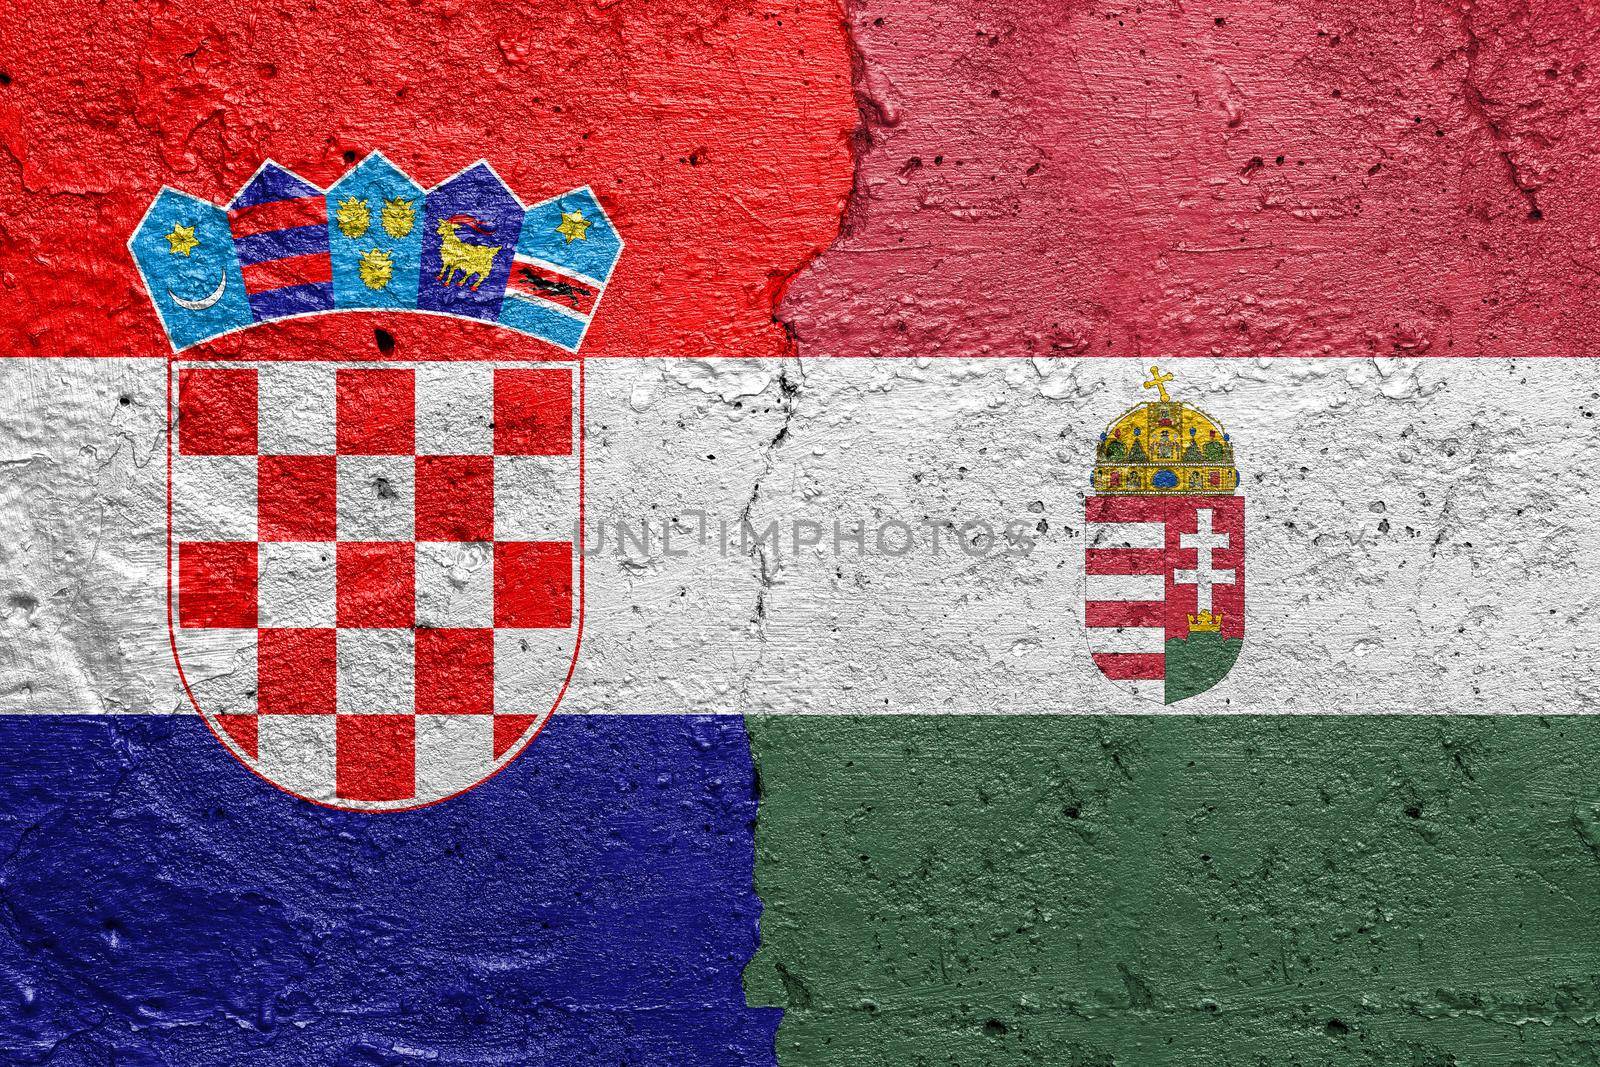 Croatia and Hungary - Cracked concrete wall painted with a Croatian flag on the left and a Hungarian flag on the right stock photo by adamr